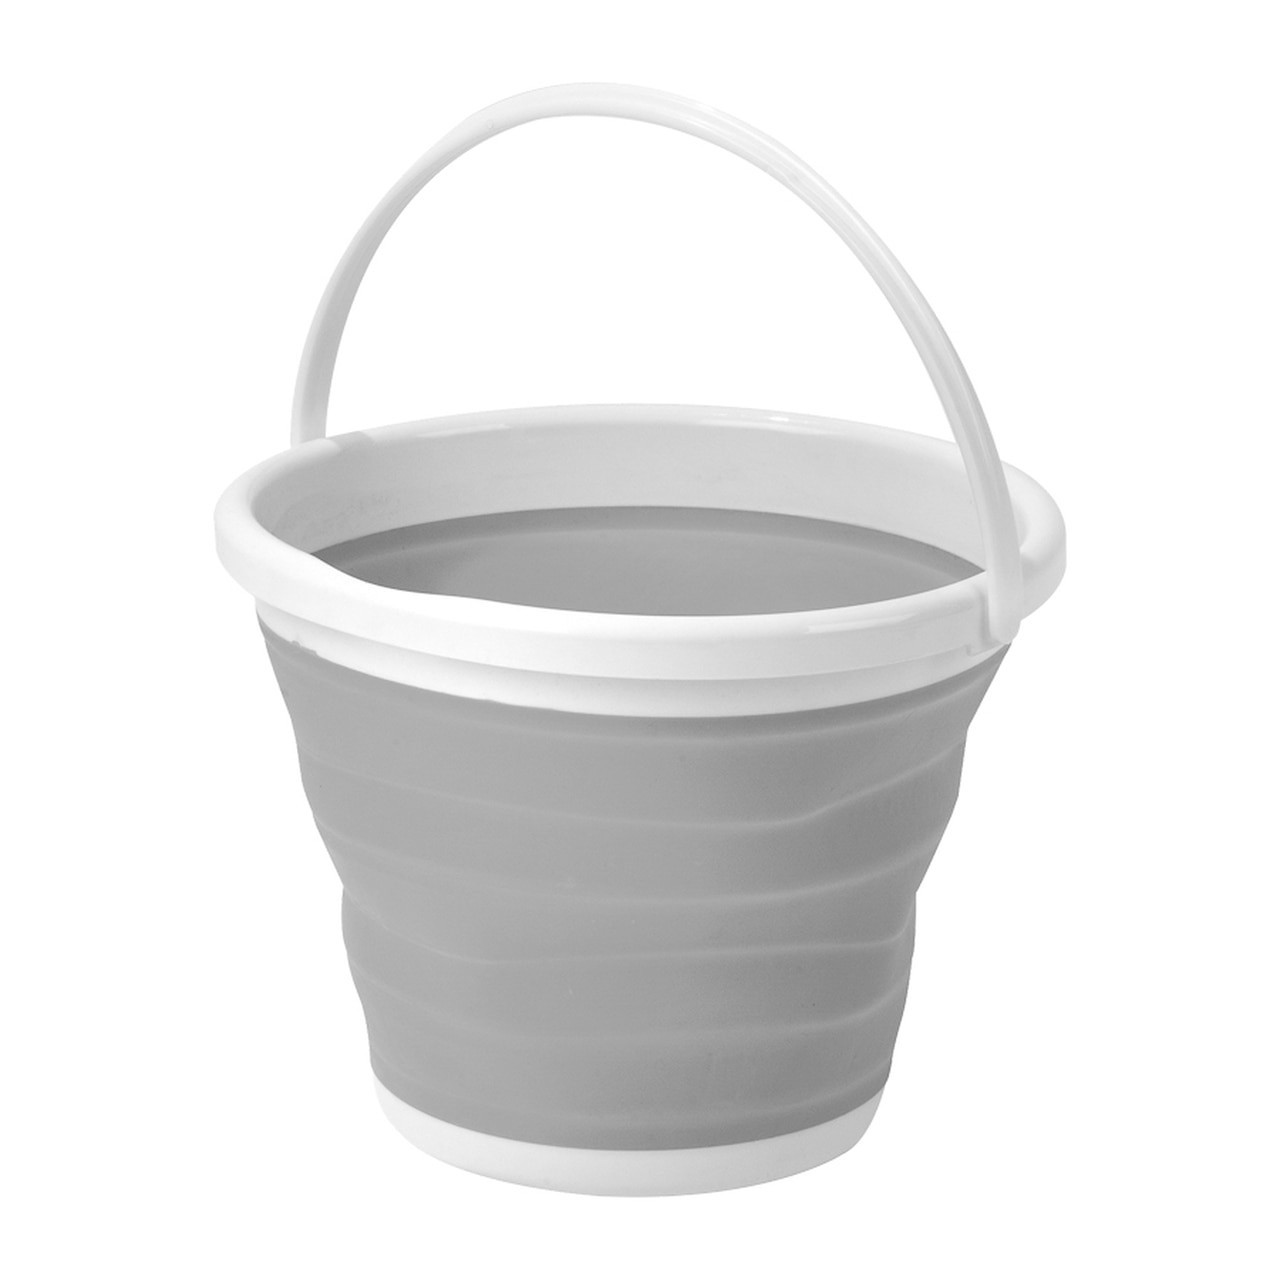 A collapsible bucket! Super handy for dirty clothes